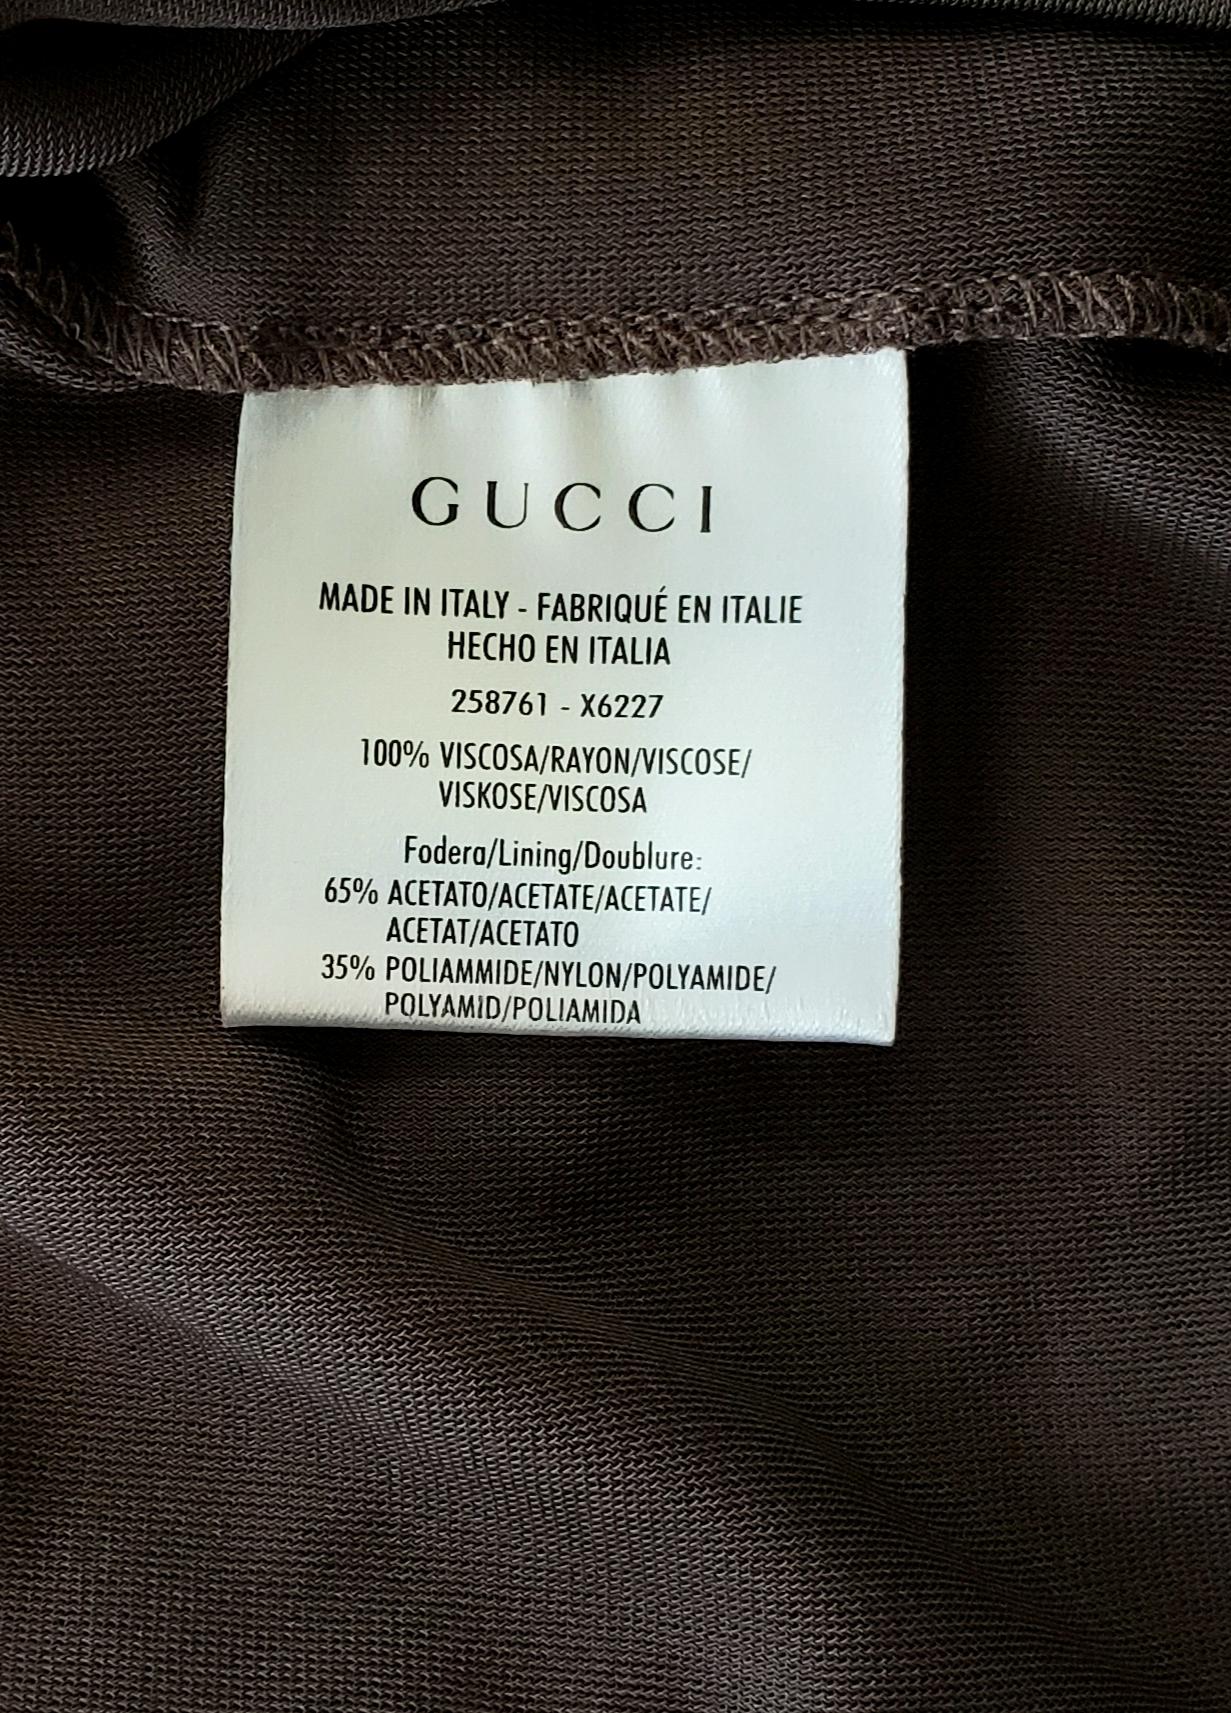 New GUCCI BROWN JERSEY DRESS WITH JEWELED BOW PIN 38 - 4 2